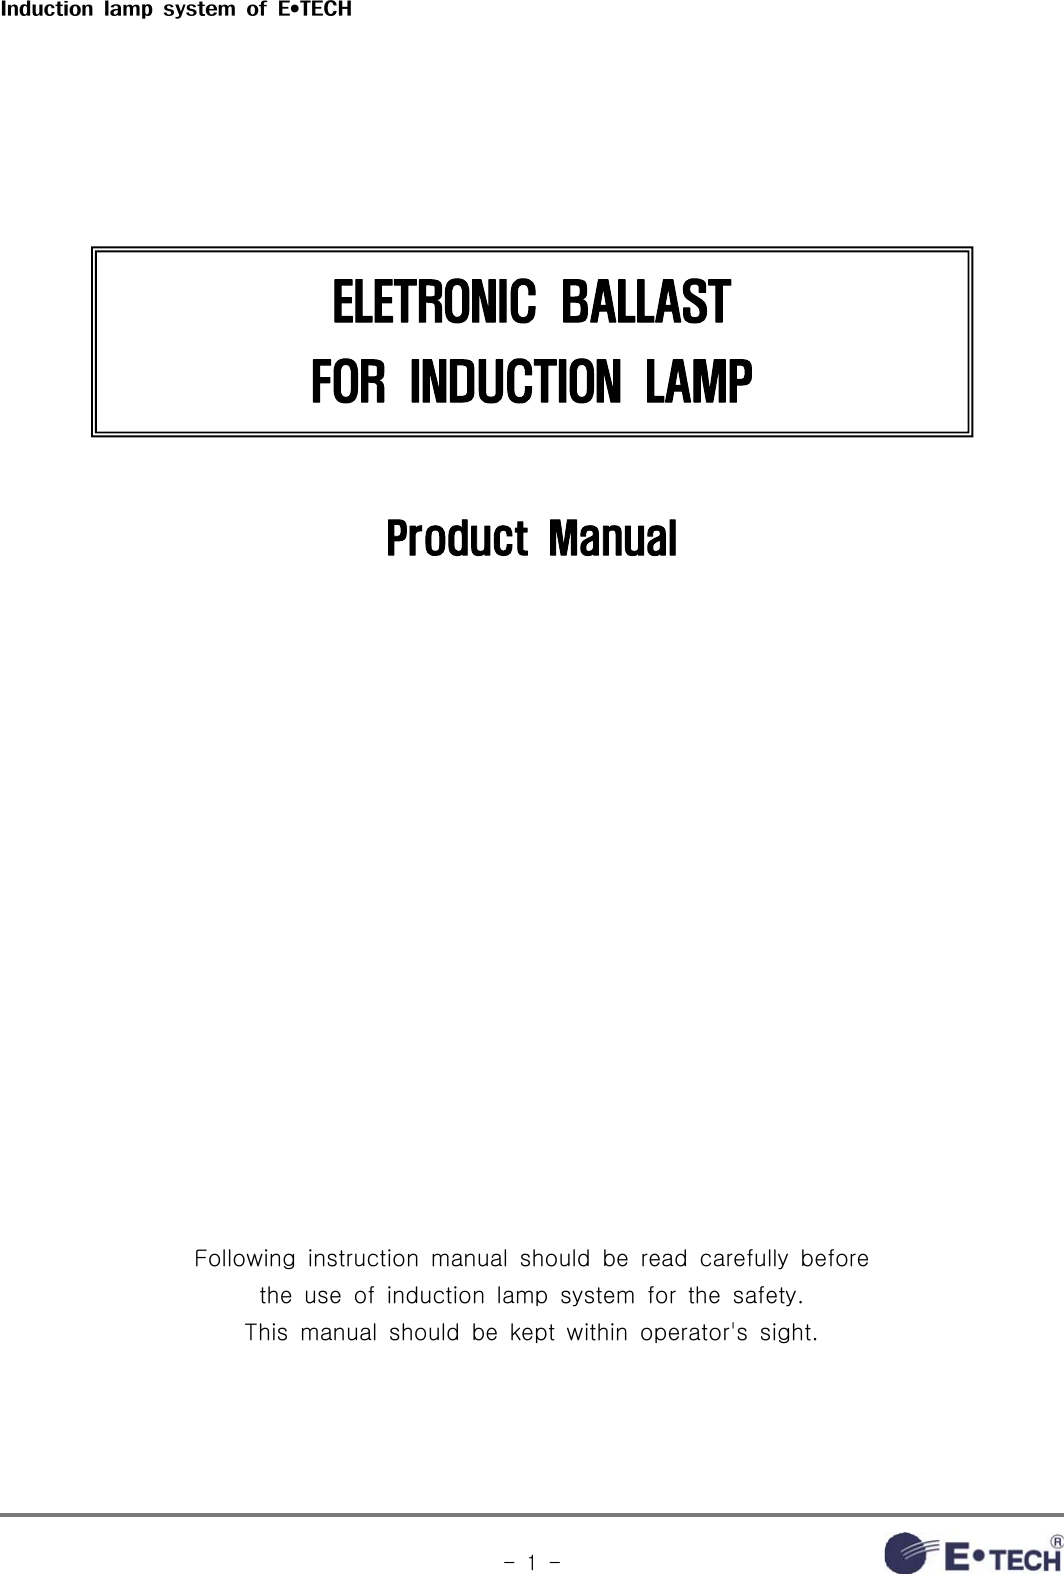 Induction  lamp  system  of  E•TECH-  1  -ELETRONIC  BALLAST FOR  INDUCTION  LAMPProduct  ManualFollowing  instruction  manual  should  be  read  carefully  before the  use  of  induction  lamp  system  for  the  safety.This  manual  should  be  kept  within  operator&apos;s  sight.